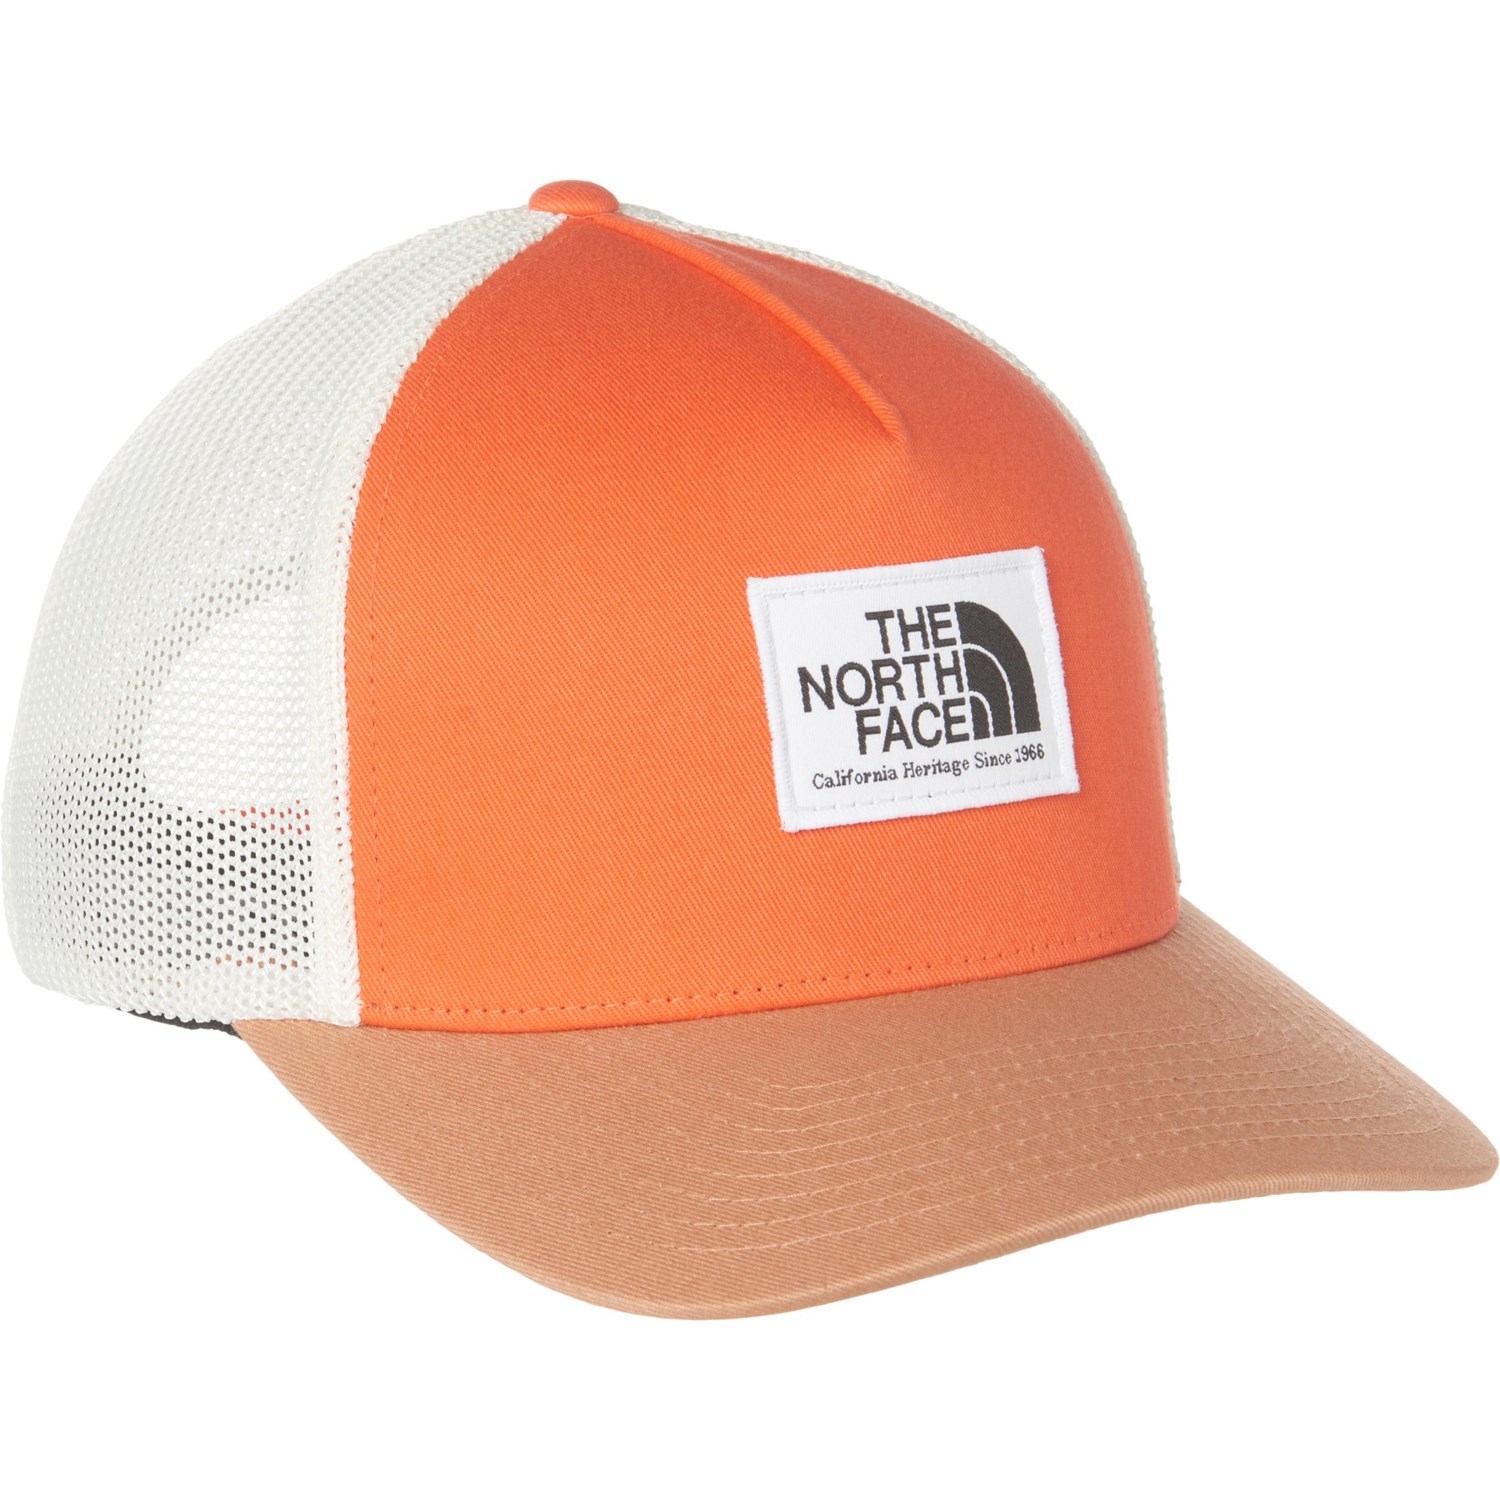 https://i.stpost.com/the-north-face-keep-it-patched-structured-trucker-hat-for-men-in-retro-orange-macchiato-brown~p~3fkgh_01~1500.2.jpg